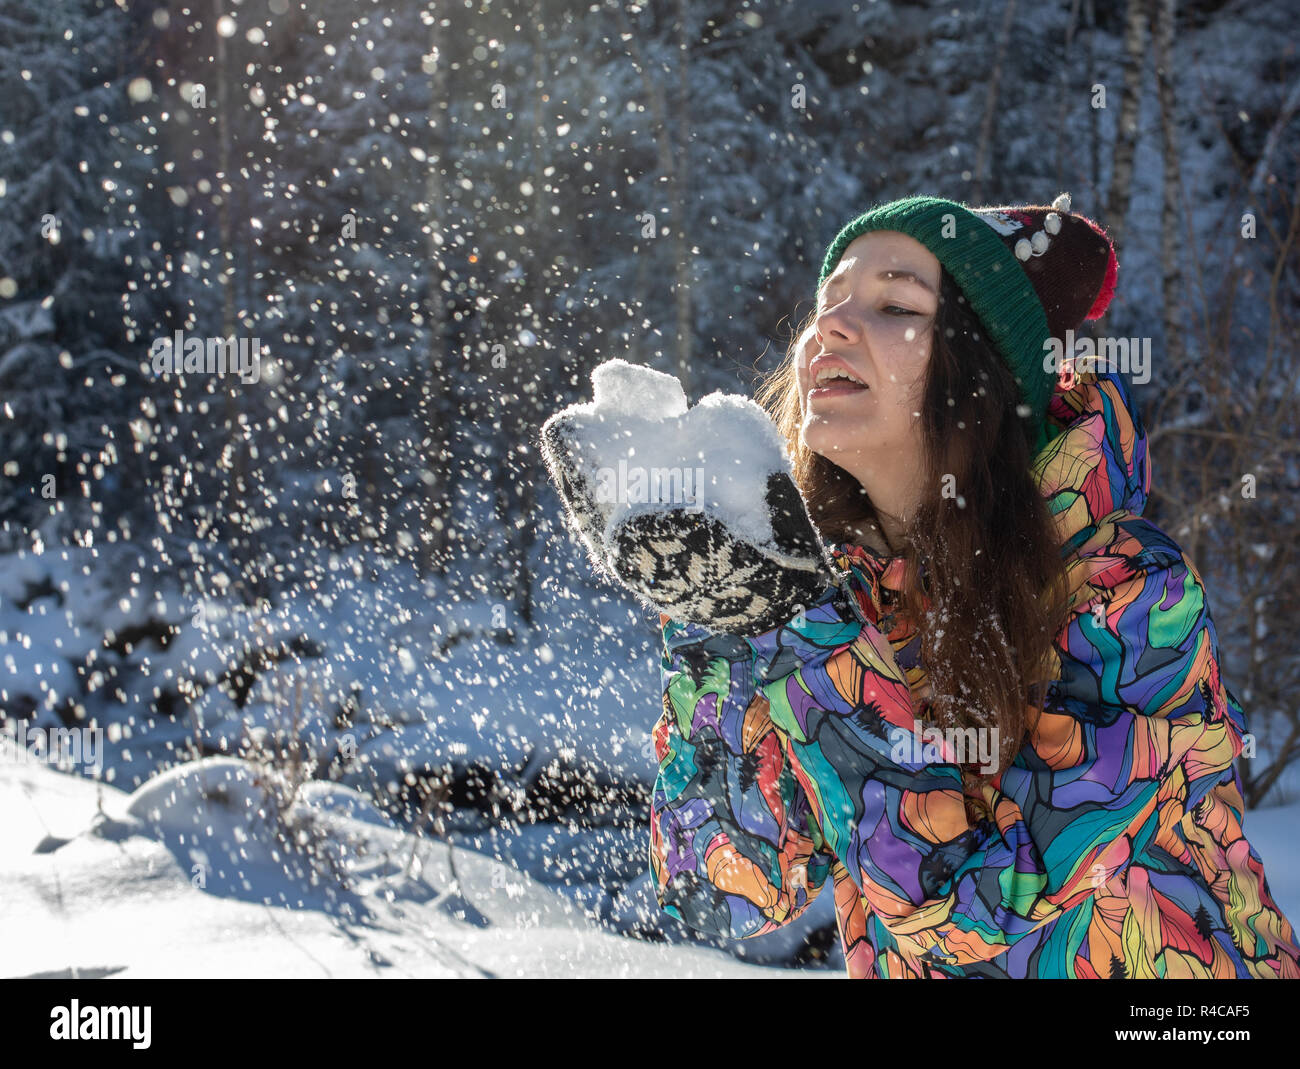 Happy winter fun woman throwing snow banner. Panorama crop of outdoor lifestyle girl playing in snow outside laughing in yellow coat, hat, gloves and scarf. Stock Photo